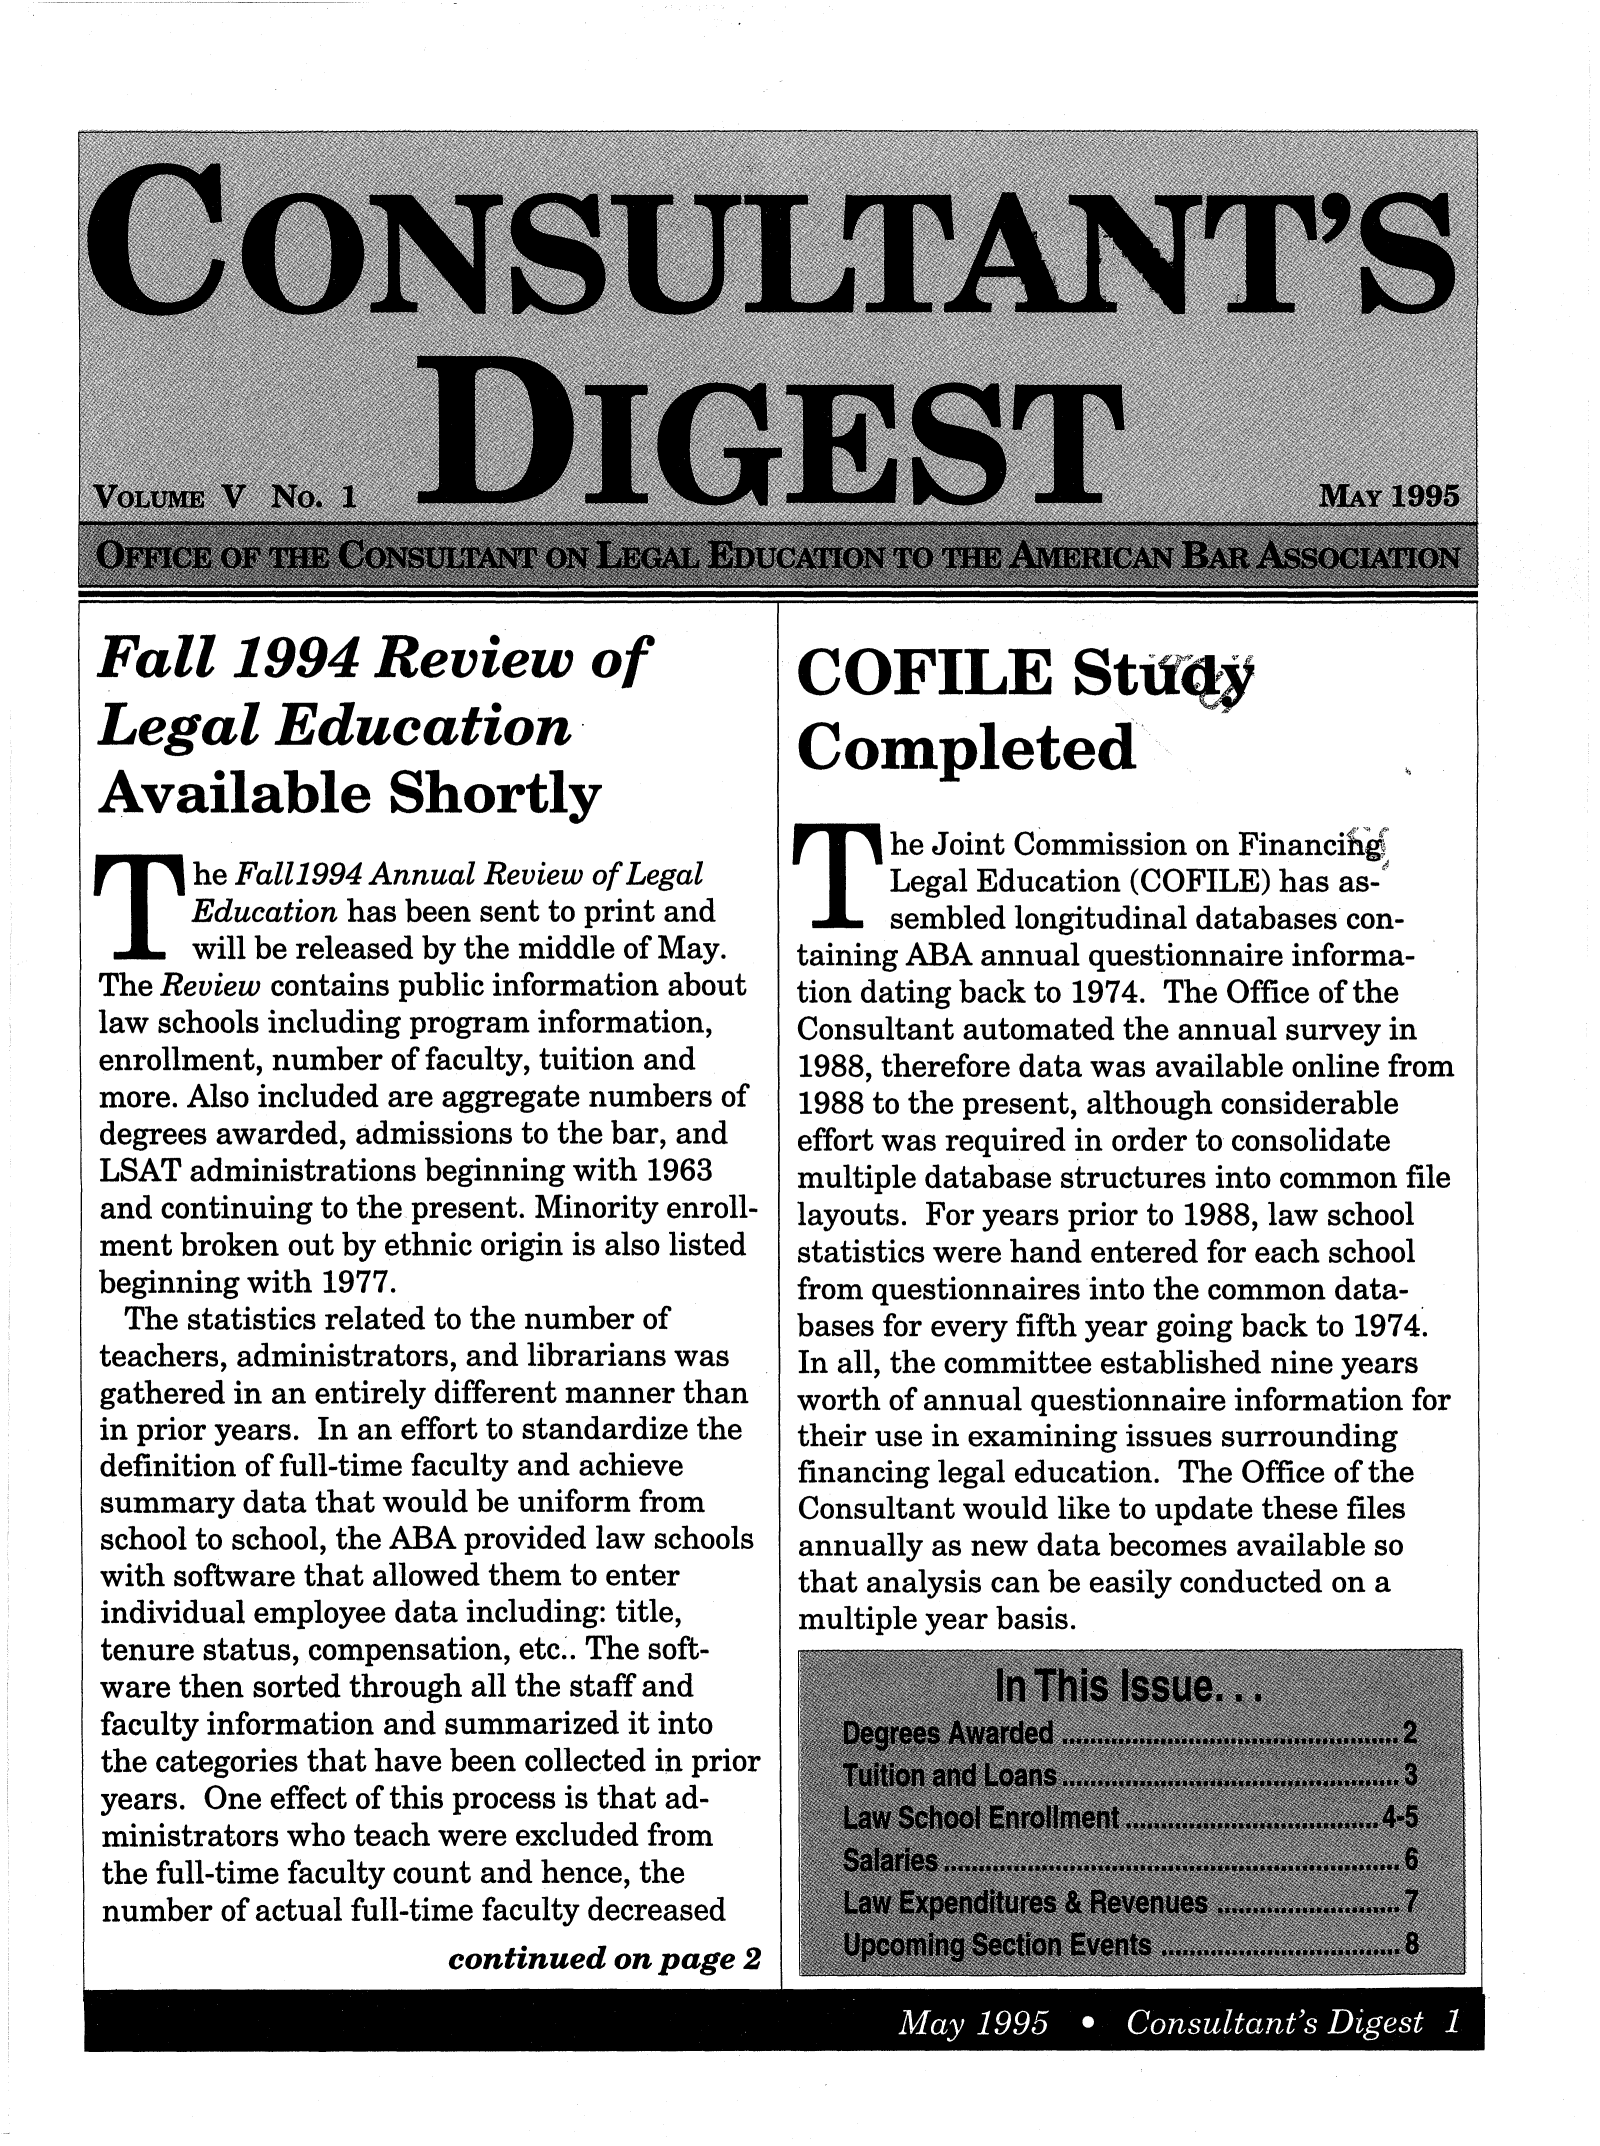 handle is hein.journals/cnsldig5 and id is 1 raw text is: Fall 1994 Review of
Legal Education
Available Shortly
he Fall1994 Annual Review of Legal
Education has been sent to print and
will be released by the middle of May.
The Review contains public information about
law schools including program information,
enrollment, number of faculty, tuition and
more. Also included are aggregate numbers of
degrees awarded, admissions to the bar, and
LSAT administrations beginning with 1963
and continuing to the present. Minority enroll-
ment broken out by ethnic origin is also listed
beginning with 1977.
The statistics related to the number of
teachers, administrators, and librarians was
gathered in an entirely different manner than
in prior years. In an effort to standardize the
definition of full-time faculty and achieve
summary data that would be uniform from
school to school, the ABA provided law schools
with software that allowed them to enter
individual employee data including: title,
tenure status, compensation, etc.. The soft-
ware then sorted through all the staff and
faculty information and summarized it into
the categories that have been collected in prior
years. One effect of this process is that ad-
ministrators who teach were excluded from
the full-time faculty count and hence, the
number of actual full-time faculty decreased
continued on page 2

COFILE Sttqd
Completed

he Joint Commission on Financihig
Legal Education (COFILE) has as-
sembled longitudinal databases con-
taining ABA annual questionnaire informa-
tion dating back to 1974. The Office of the
Consultant automated the annual survey in
1988, therefore data was available online from
1988 to the present, although considerable
effort was required in order to consolidate
multiple database structures into common file
layouts. For years prior to 1988, law school
statistics were hand entered for each school
from questionnaires into the common data-
bases for every fifth year going back to 1974.
In all, the committee established nine years
worth of annual questionnaire information for
their use in examining issues surrounding
financing legal education. The Office of the
Consultant would like to update these files
annually as new data becomes available so
that analysis can be easily conducted on a
multiple year basis.

May 1995     Consultants Digest I


